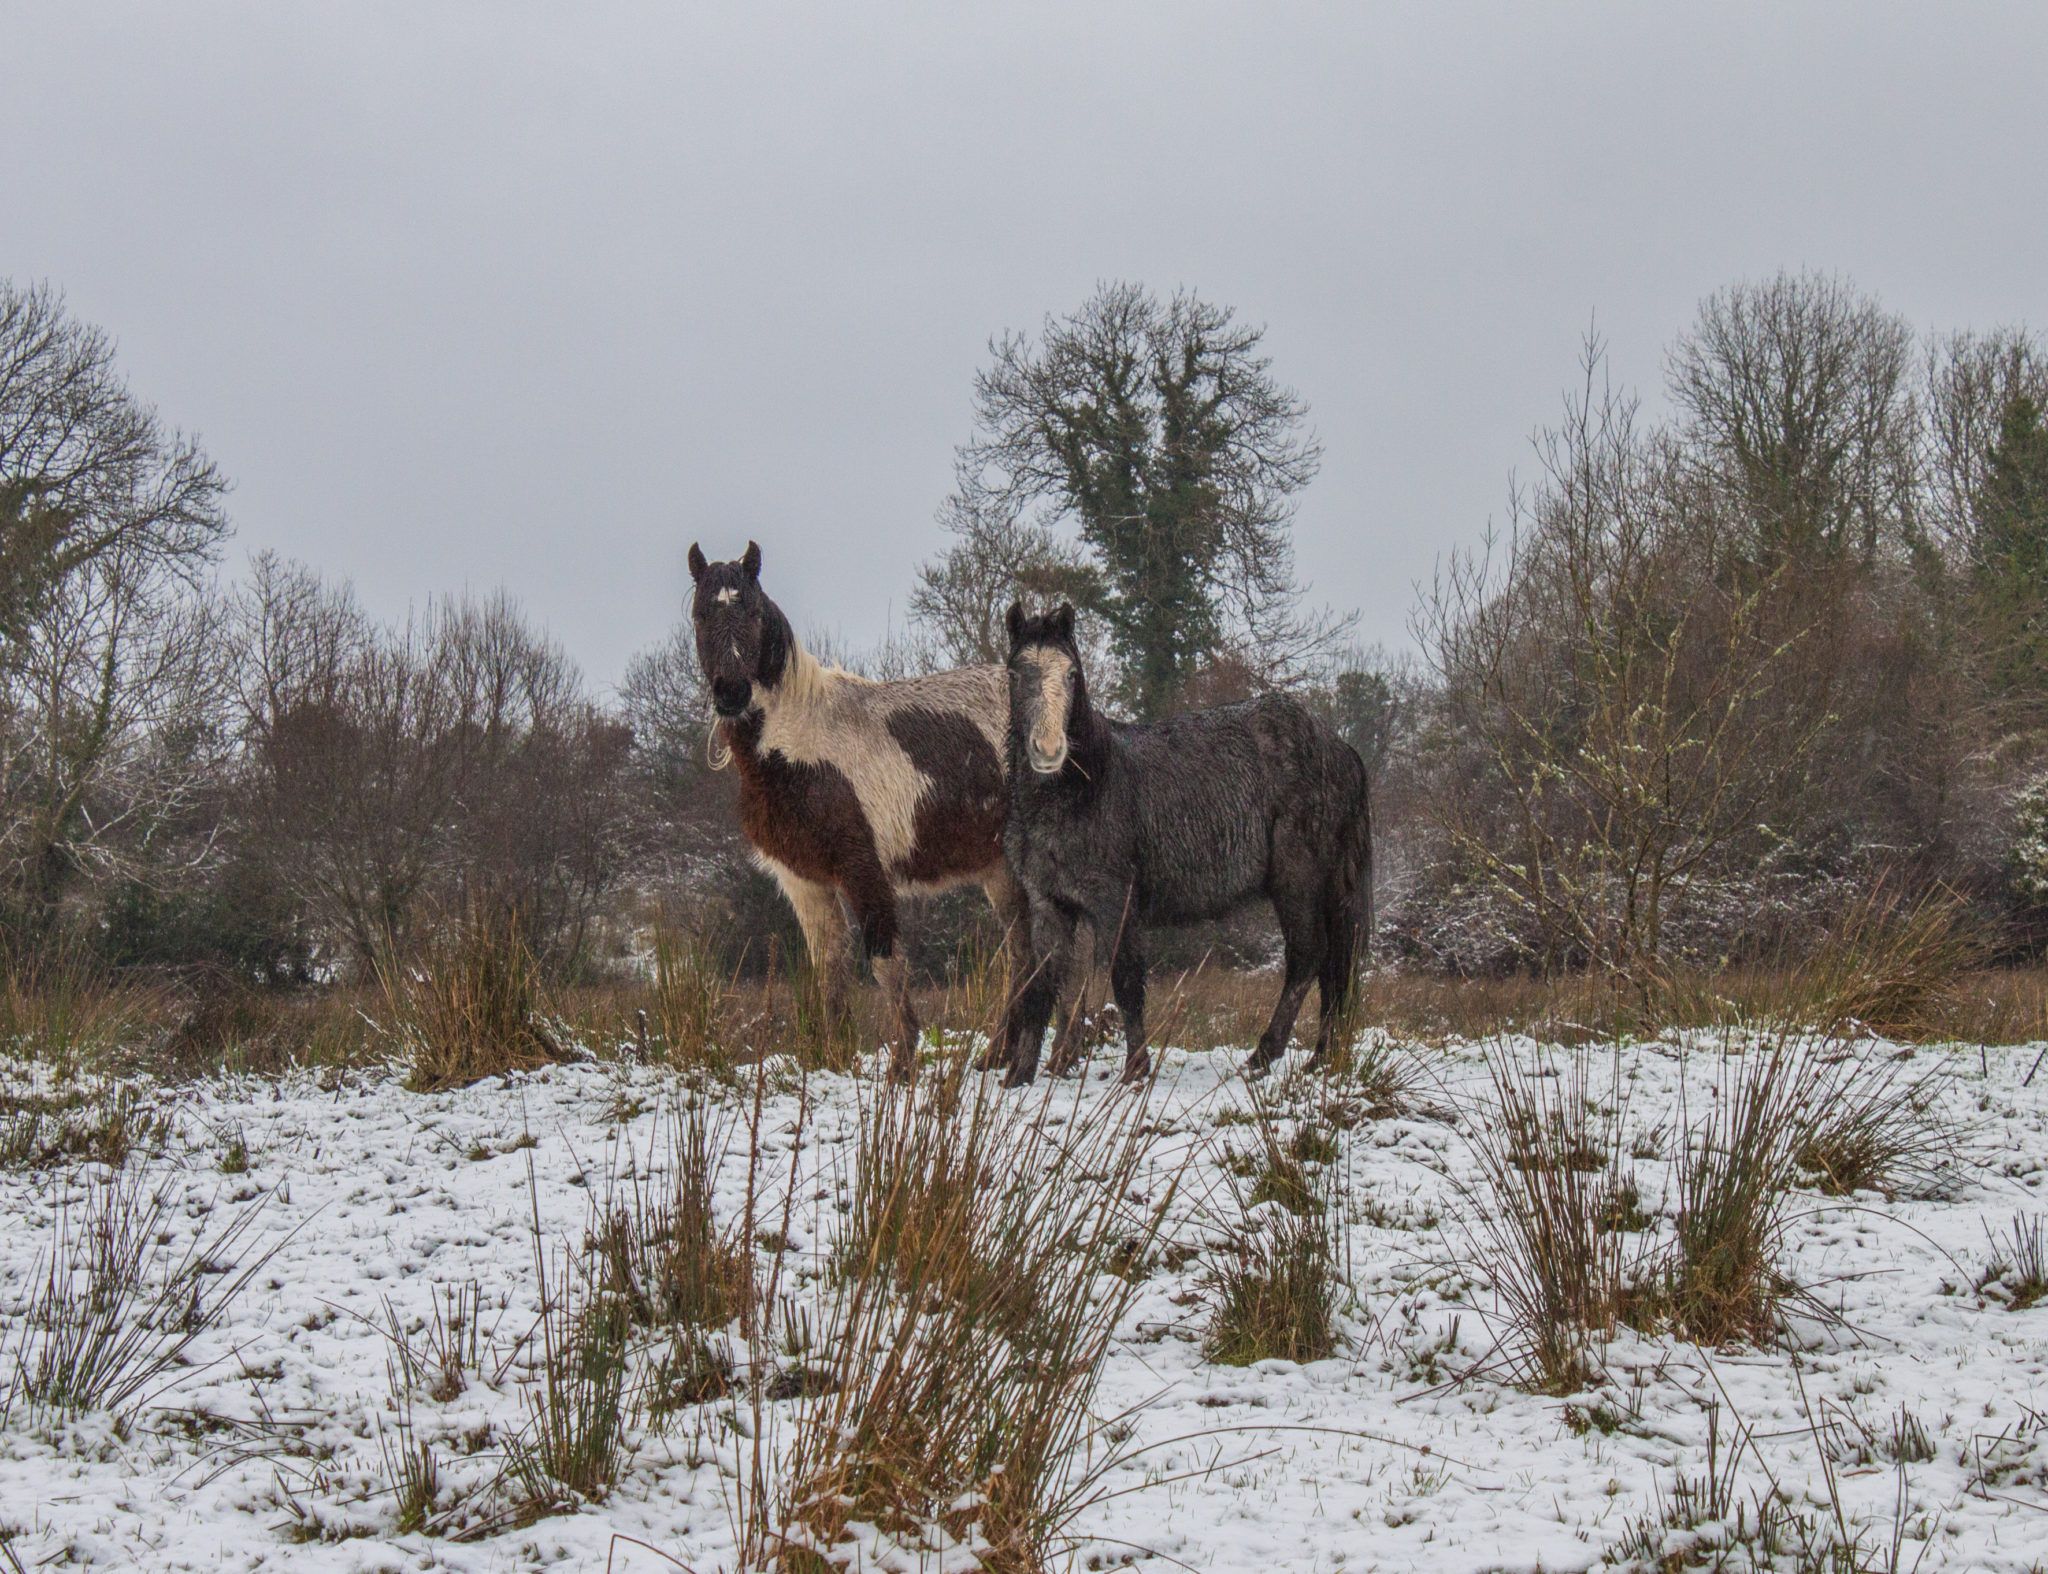 Kildare animal rescue appeals to public to foster horses over the winter months